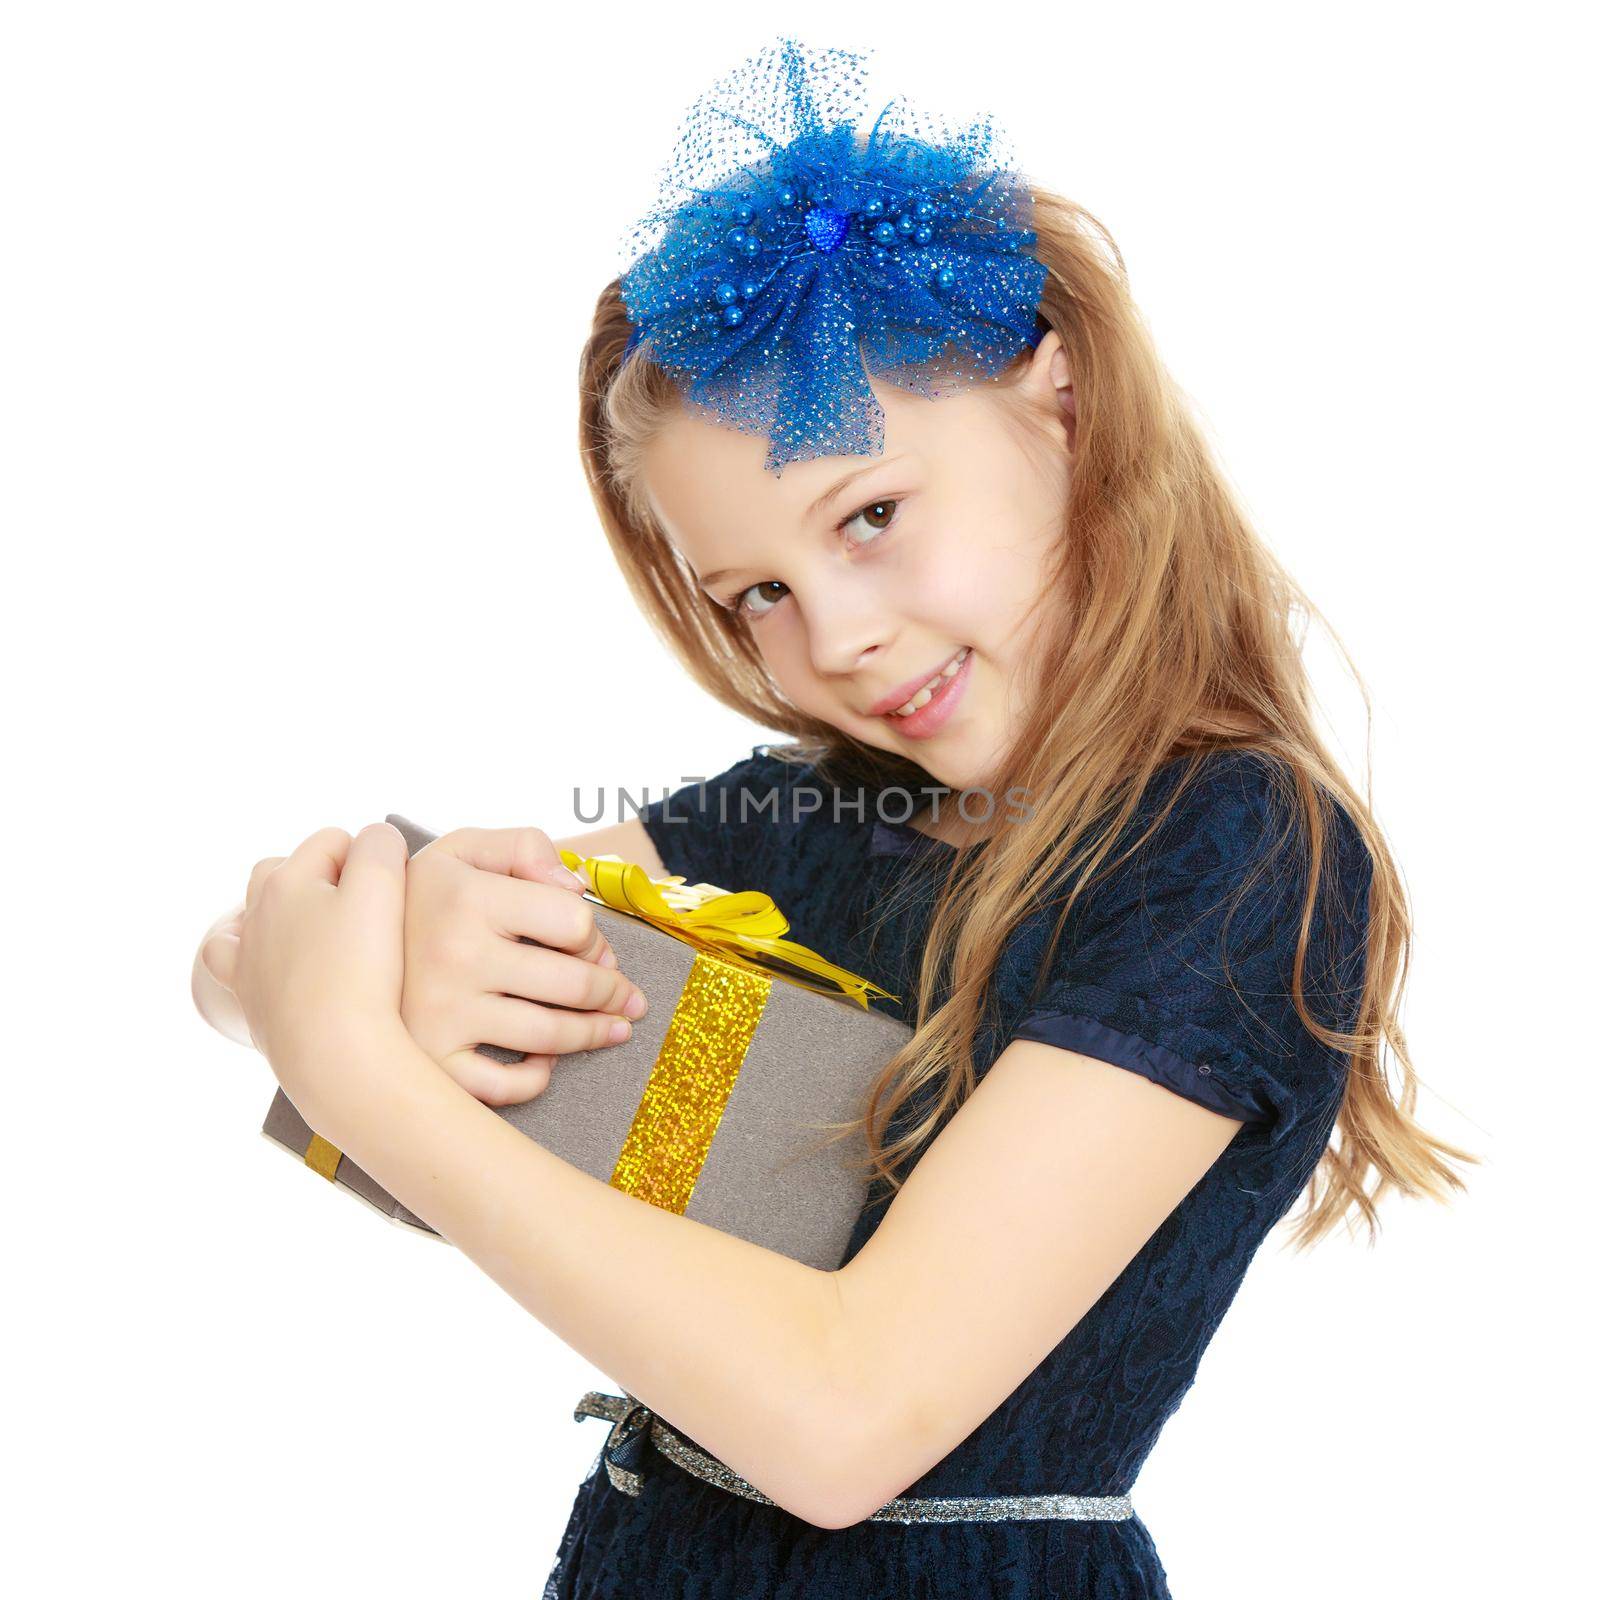 Cute Caucasian little girl In a dark blue dress and big blue bow on her head. The girl holds box with gift.Isolated on white background.